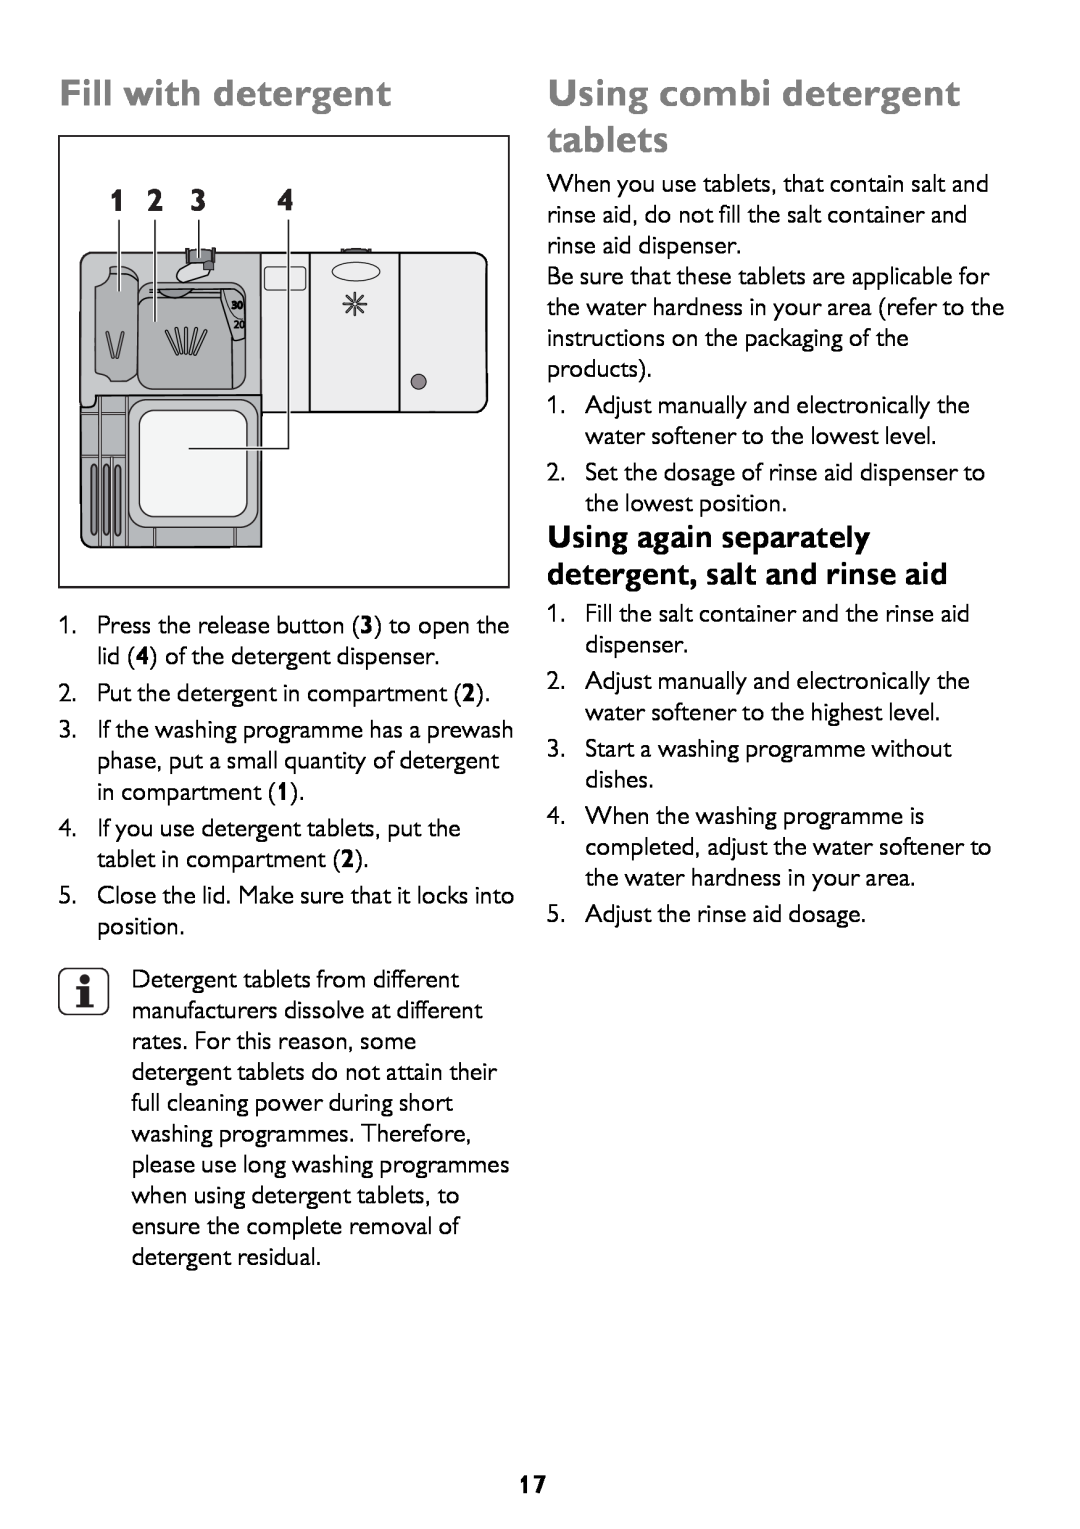 John Lewis JLBIDW 1201 instruction manual Fill with detergent, Using combi detergent tablets 